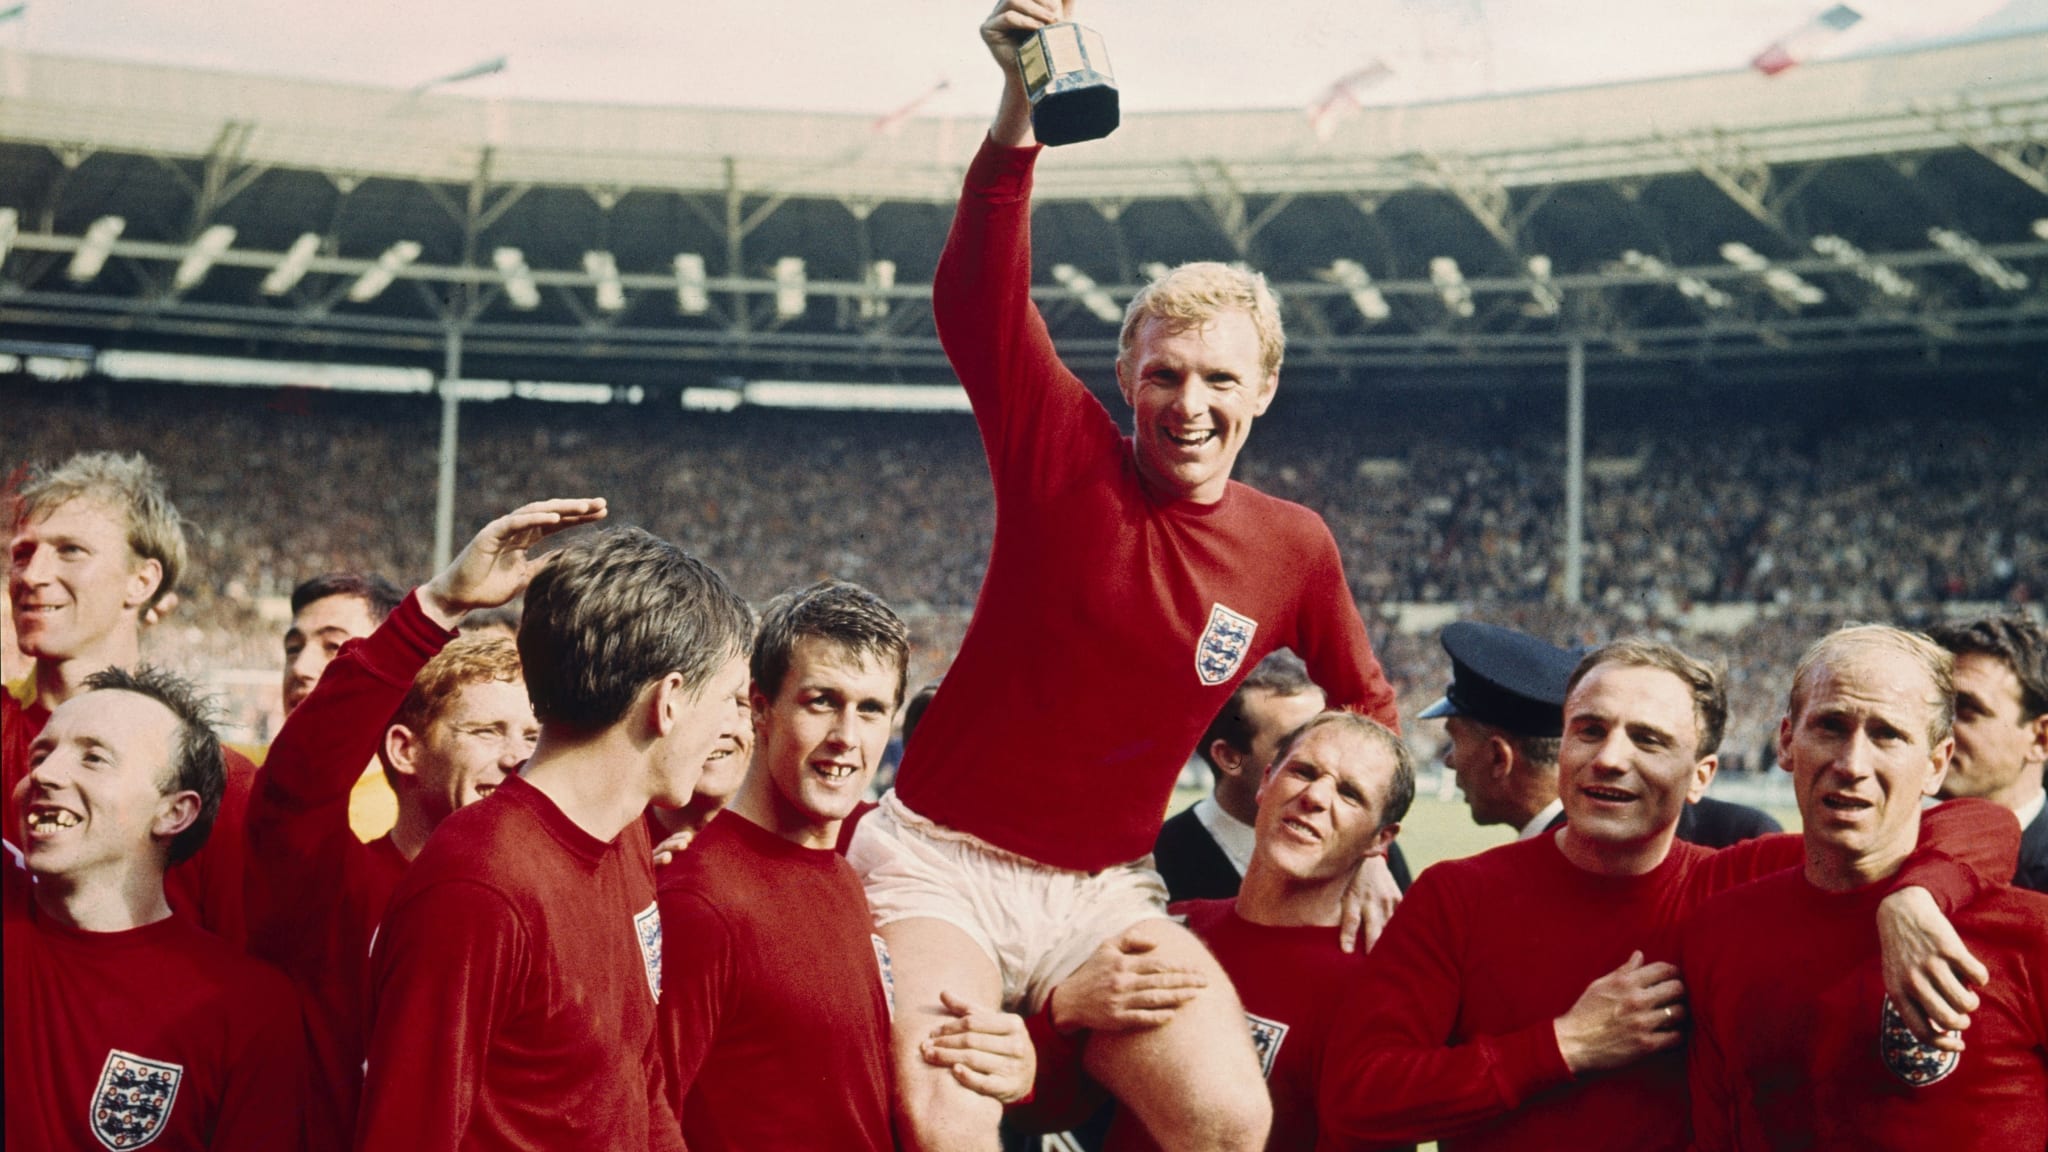 Bobby Moore Fund marks what would've been Bobby's 80th birthday, and it's also #BowelCancerAwarenessMonth. Here at the Bobby Moore Fund, we won't stop until we've achieved our goal of